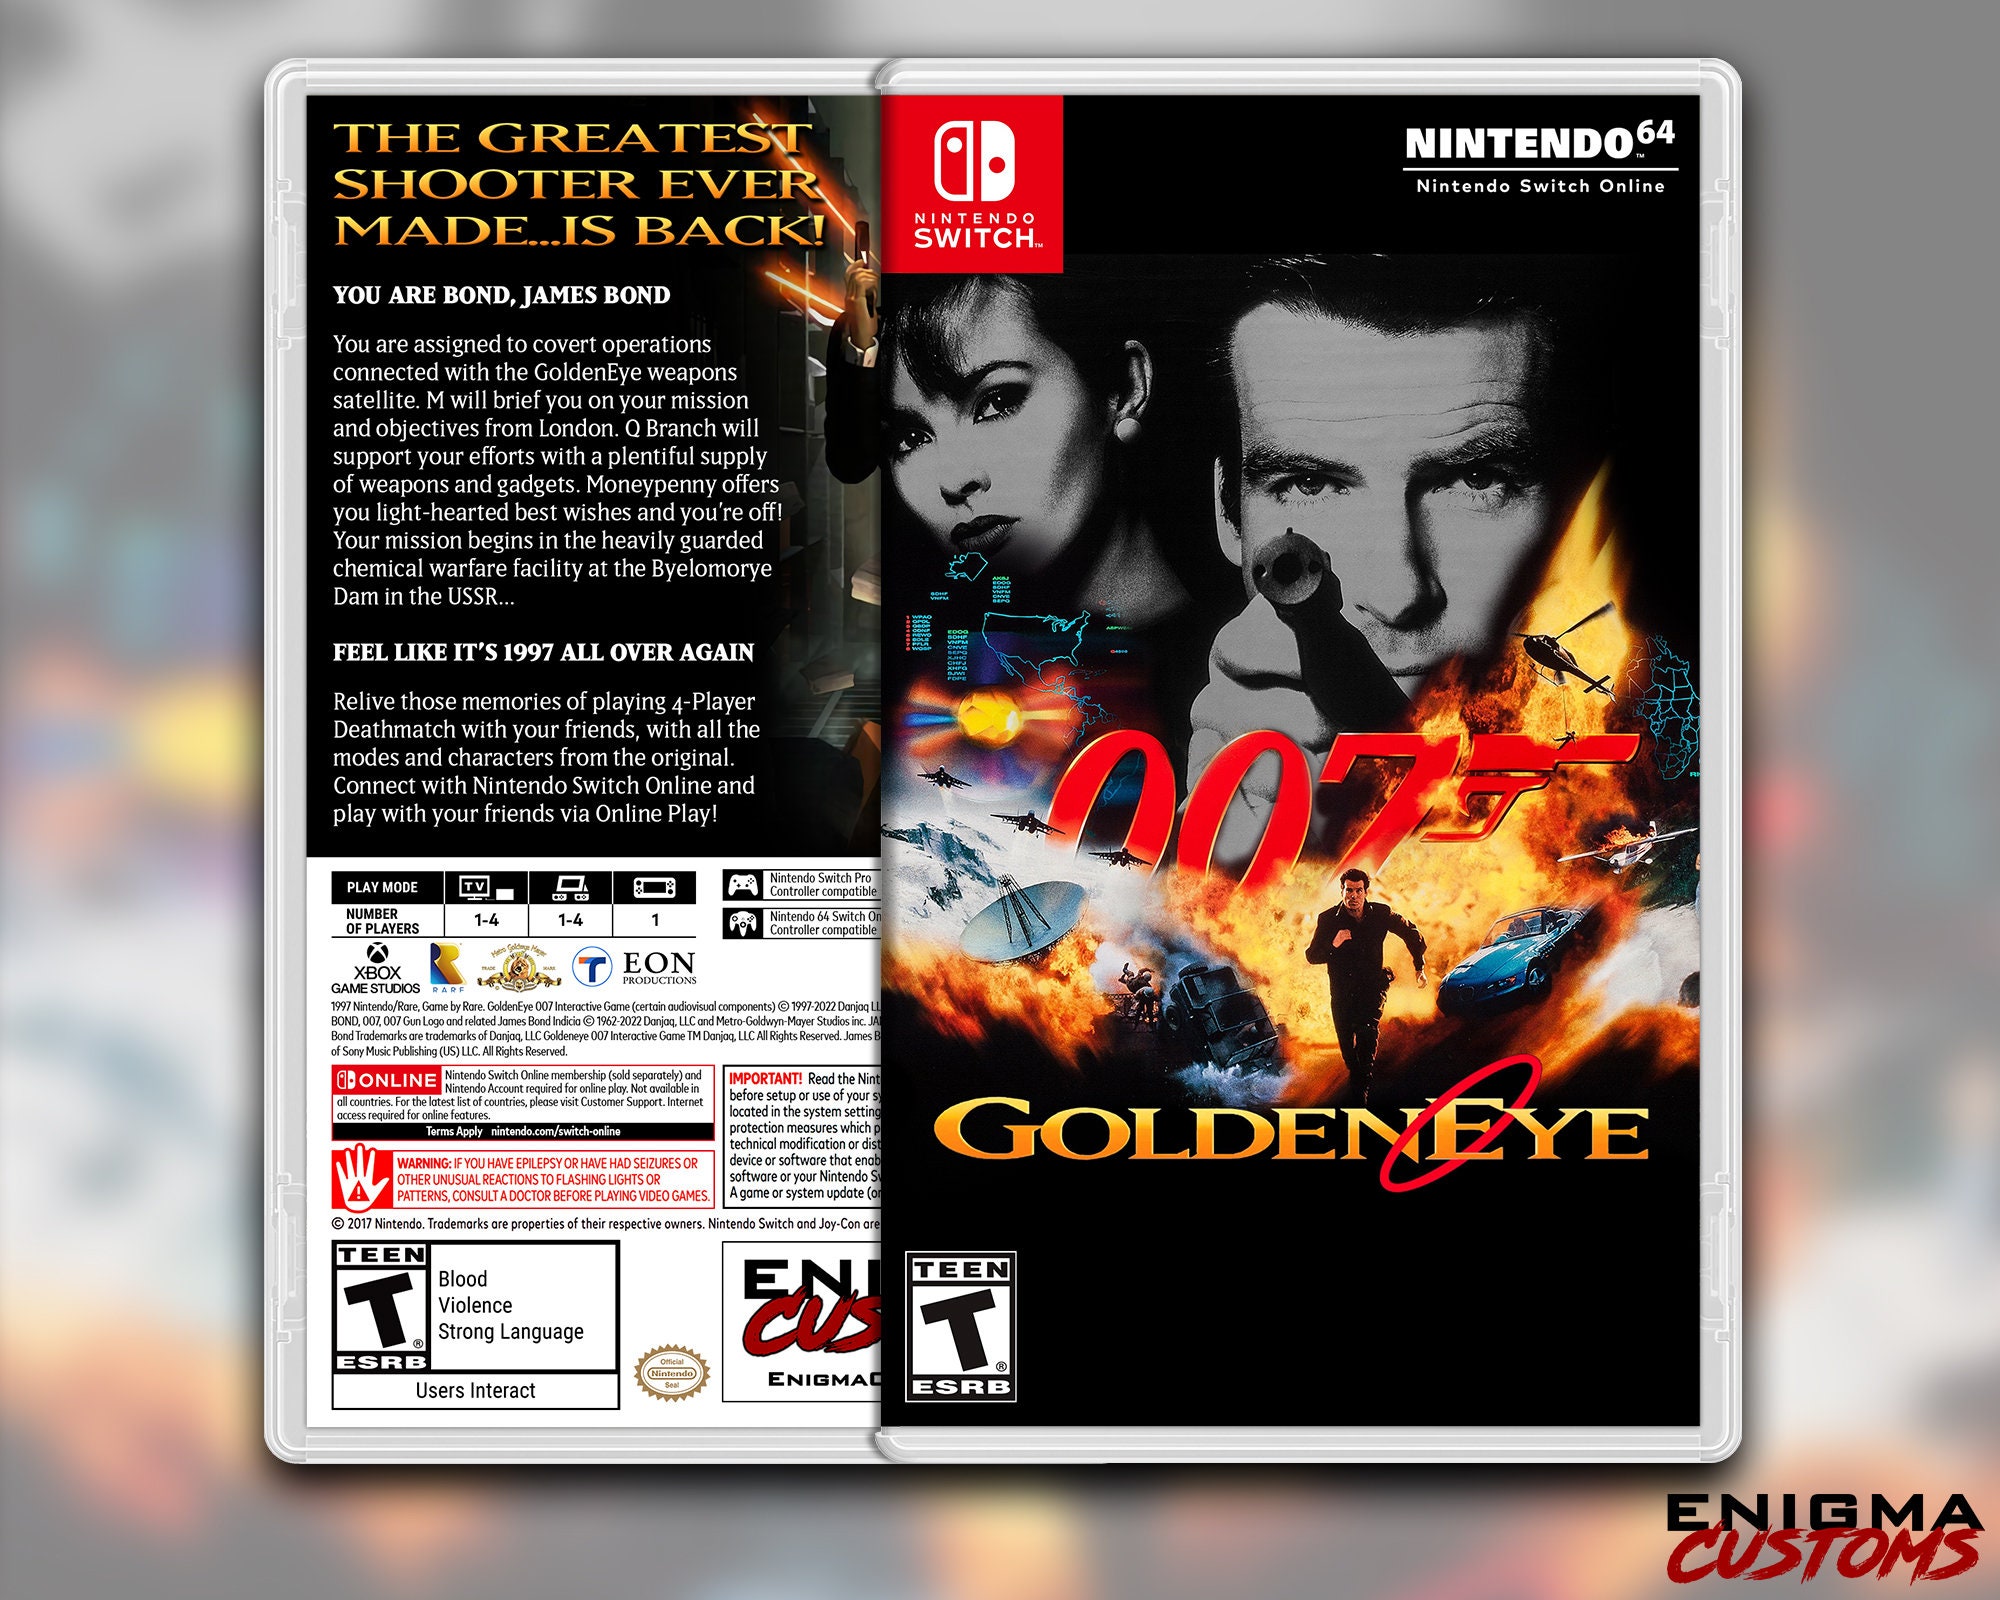 Goldeneye 007 on Nintendo Switch Online sees some textures fixed